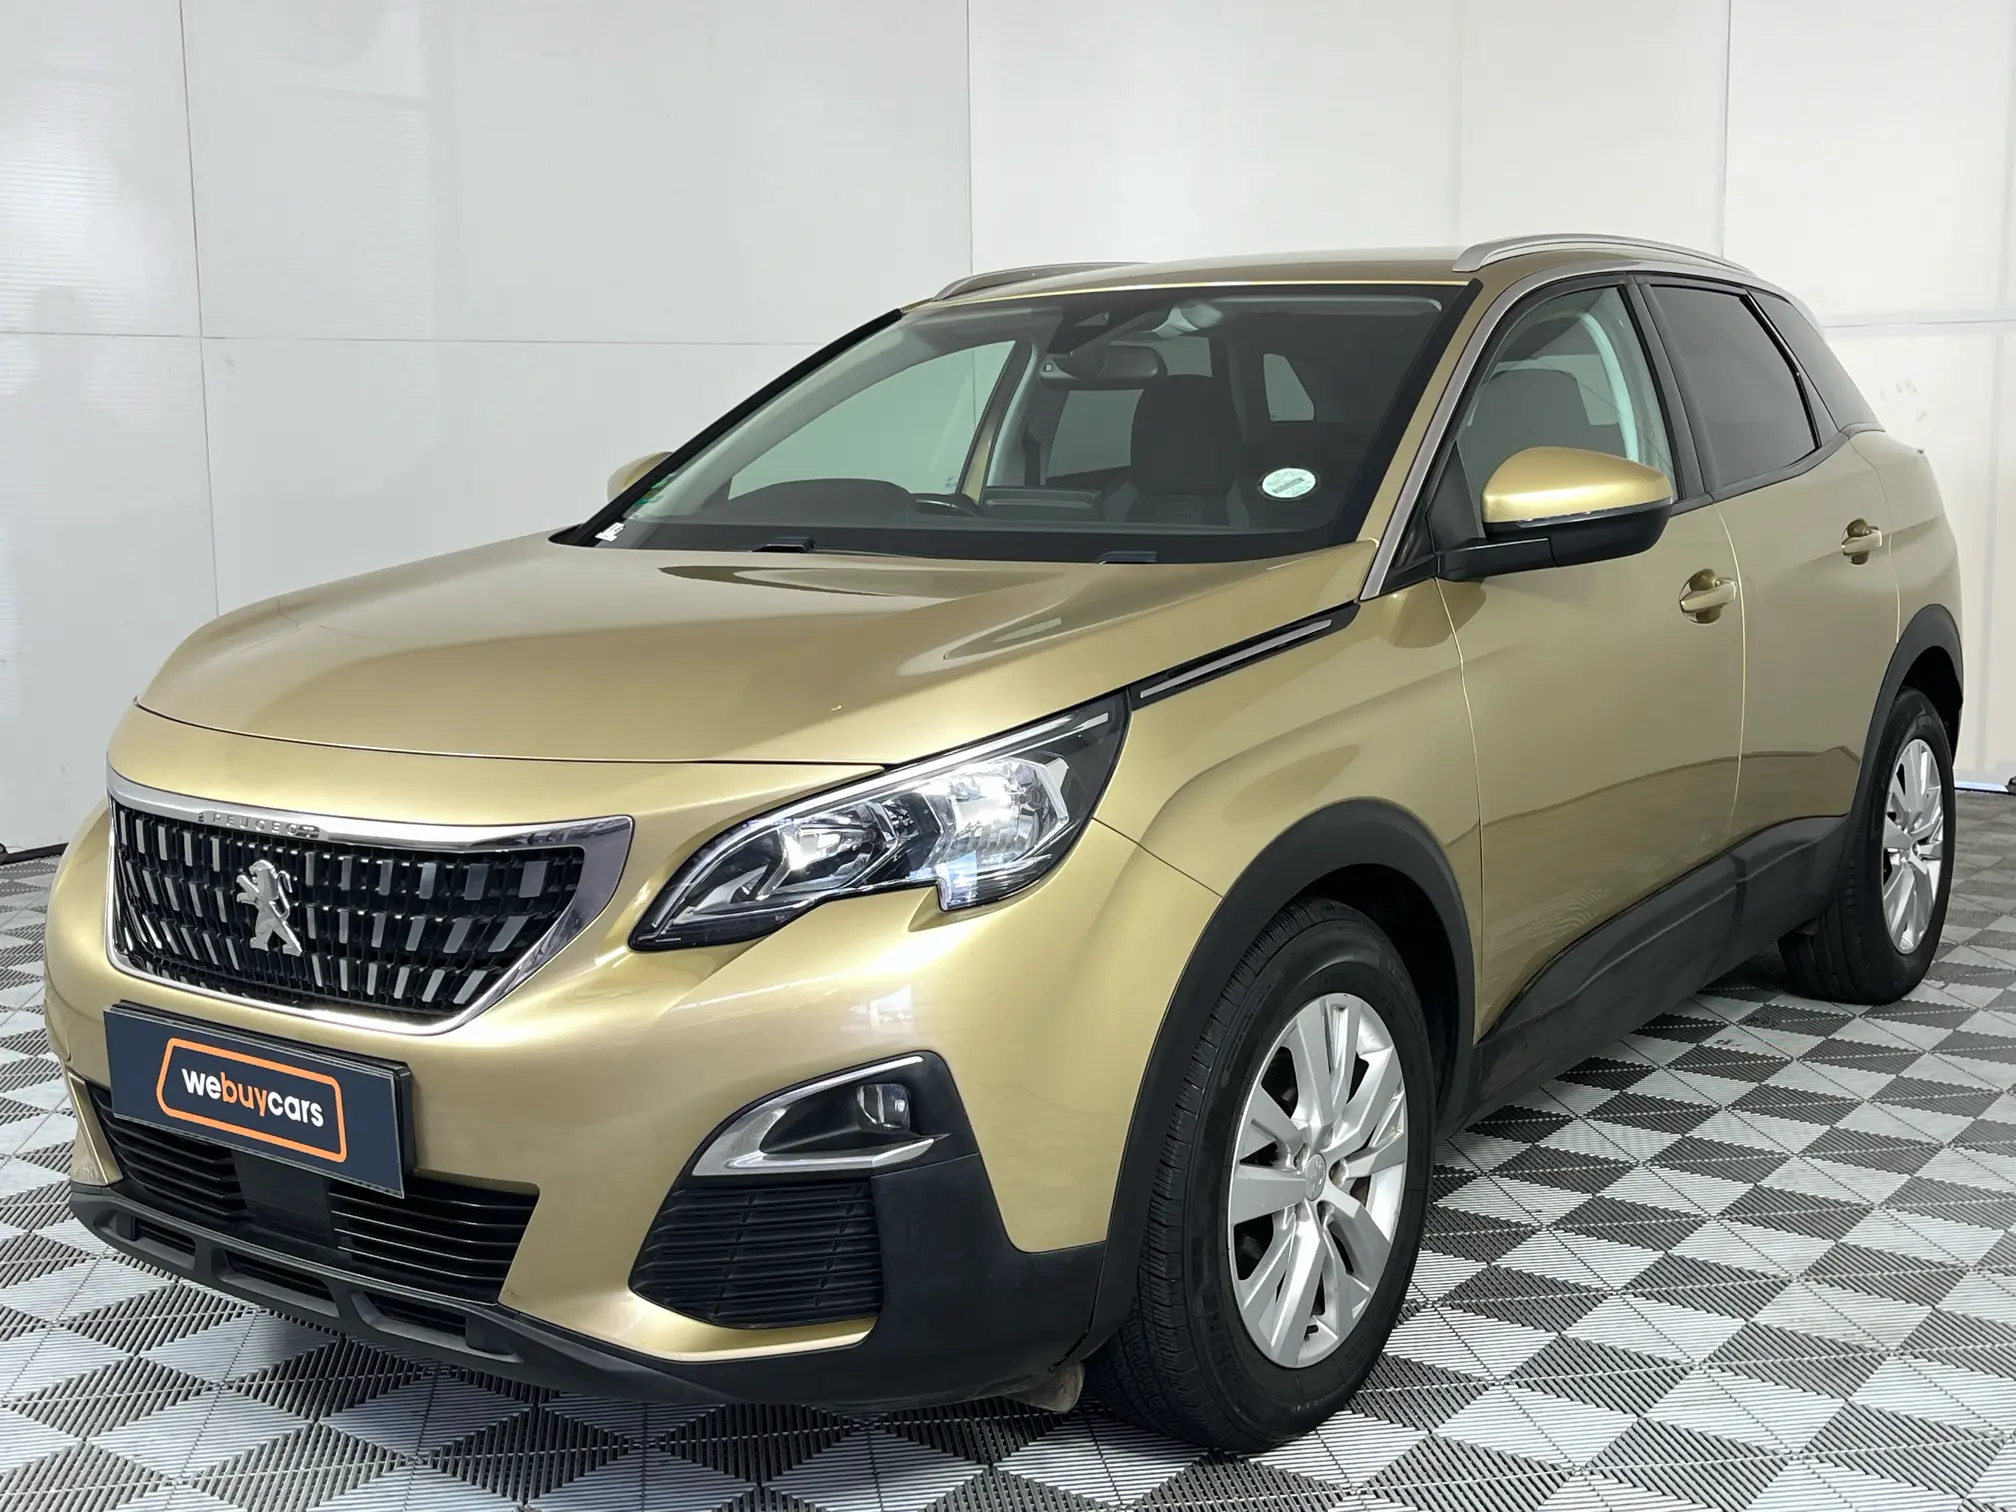 2018 Peugeot 3008 2.0 HDI Active